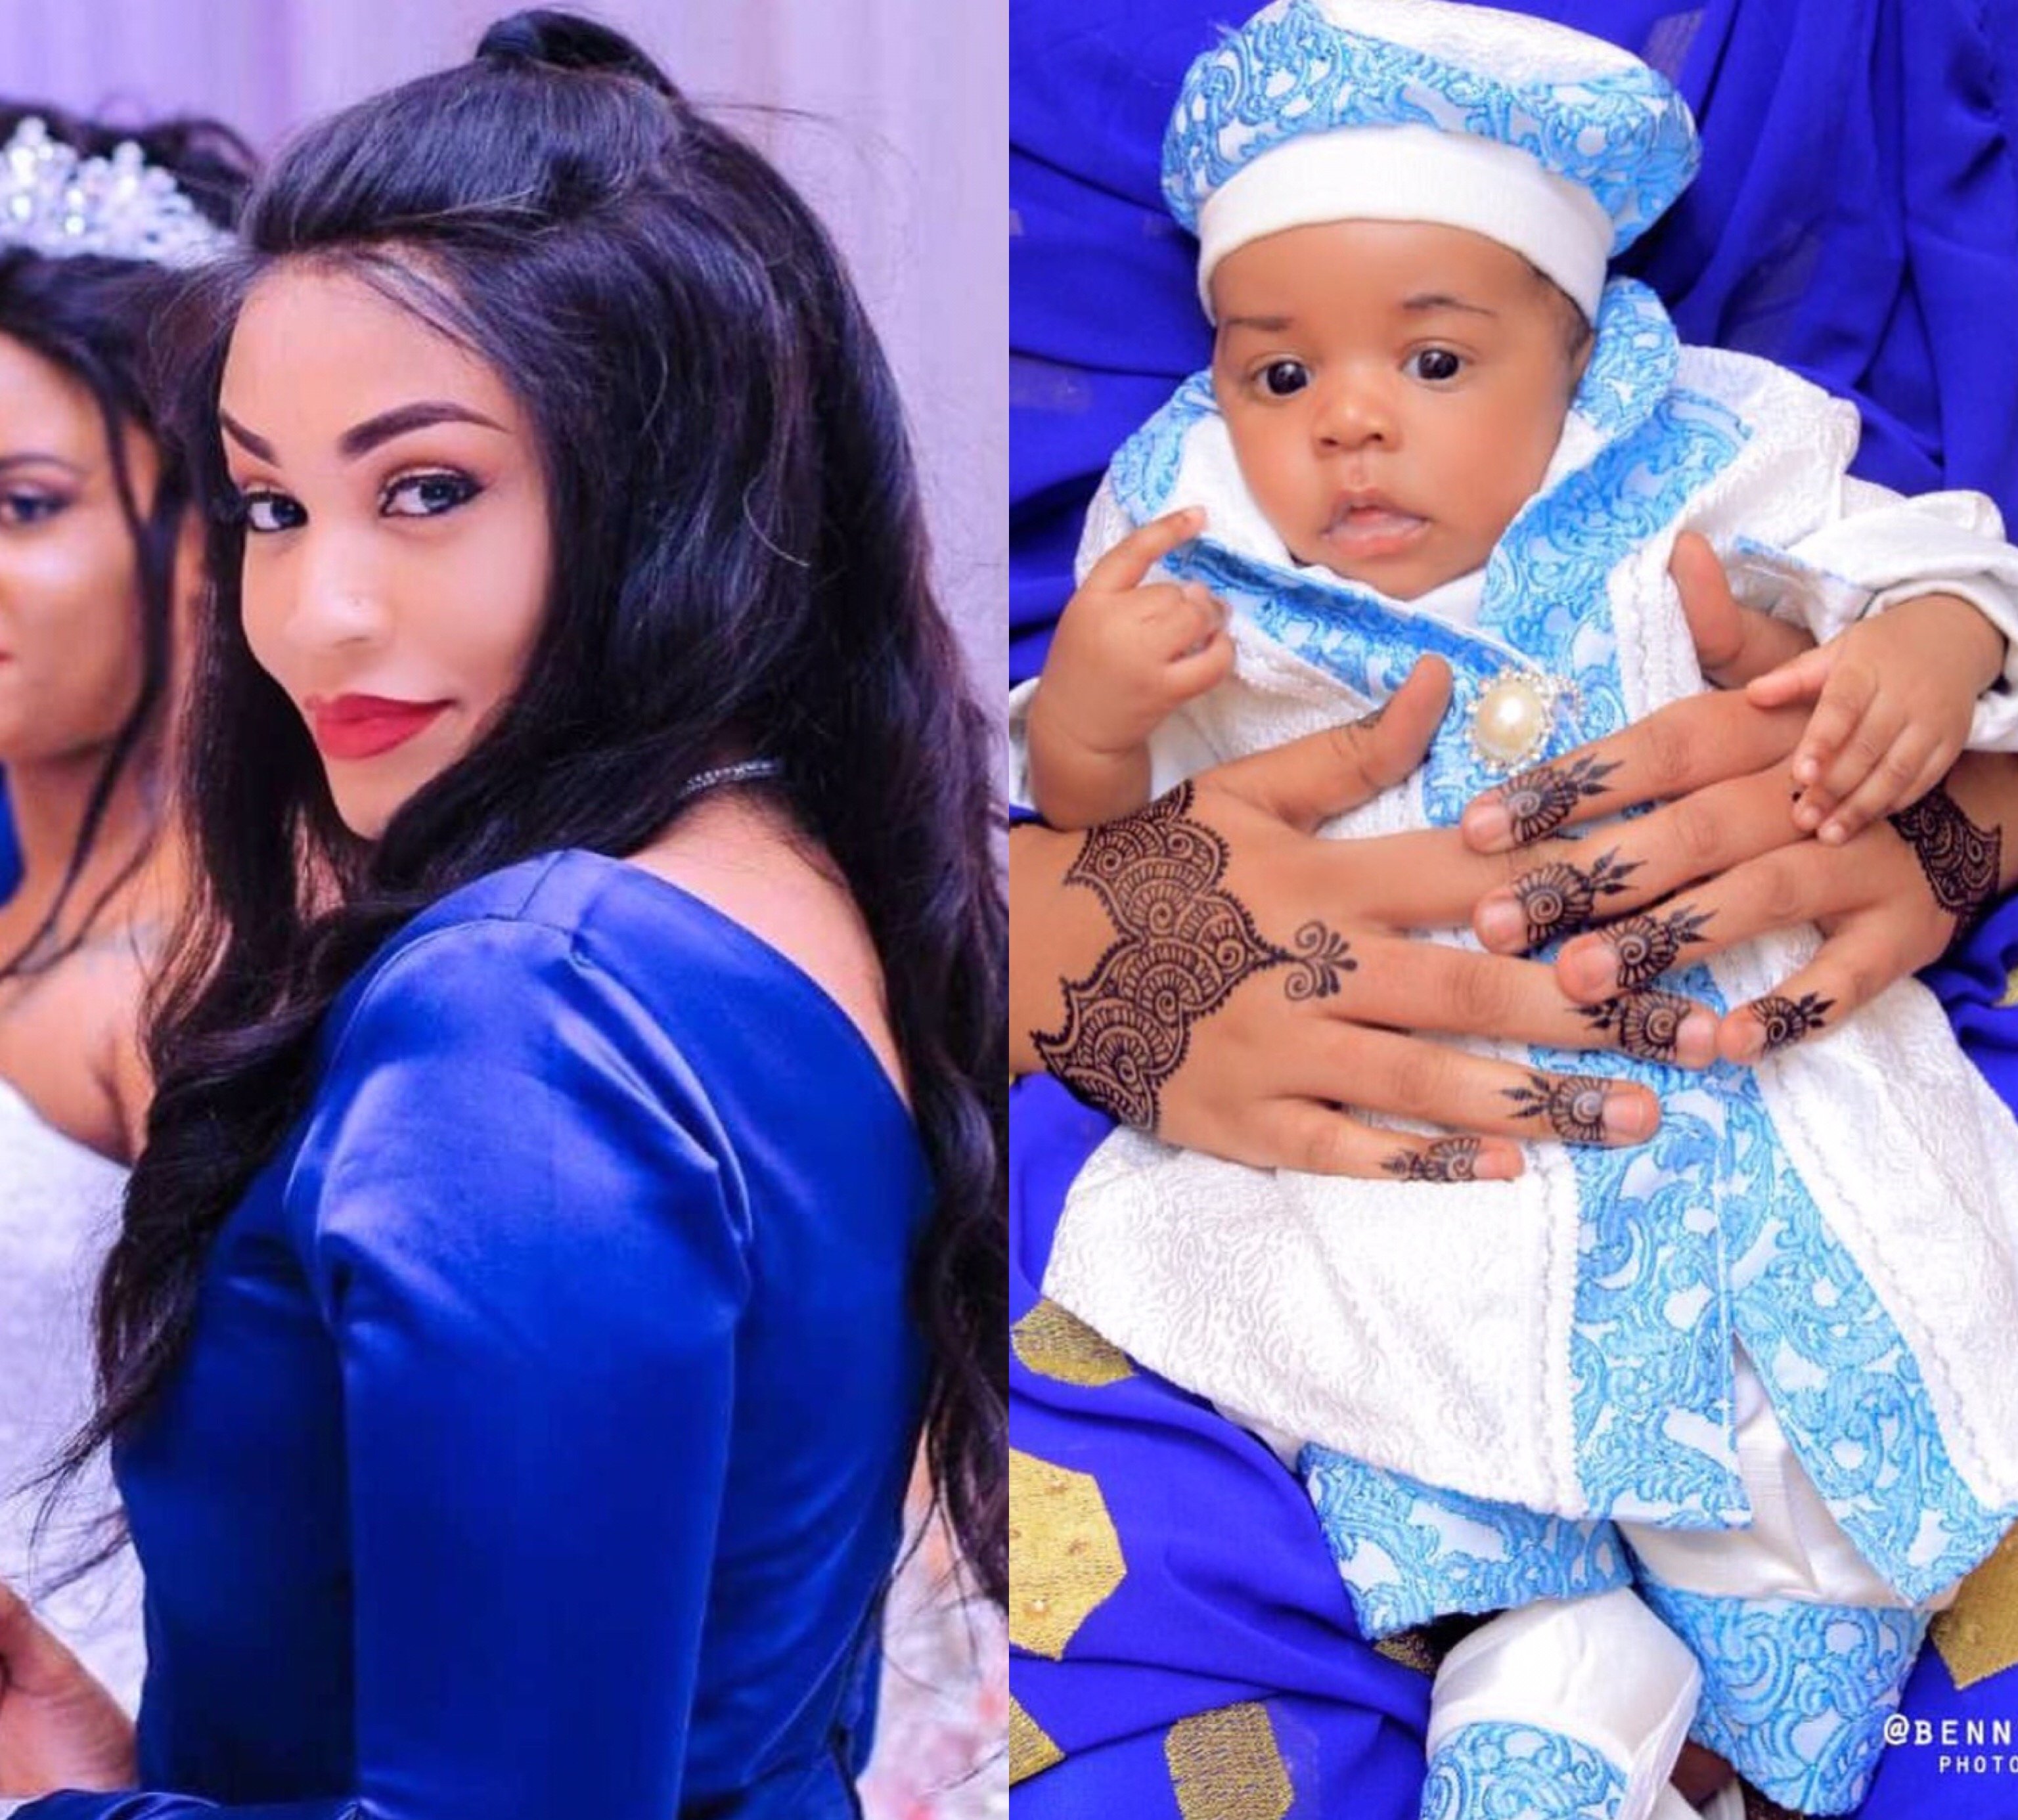 Zari Hassan’s comments on Hamisa Mobetto’s son